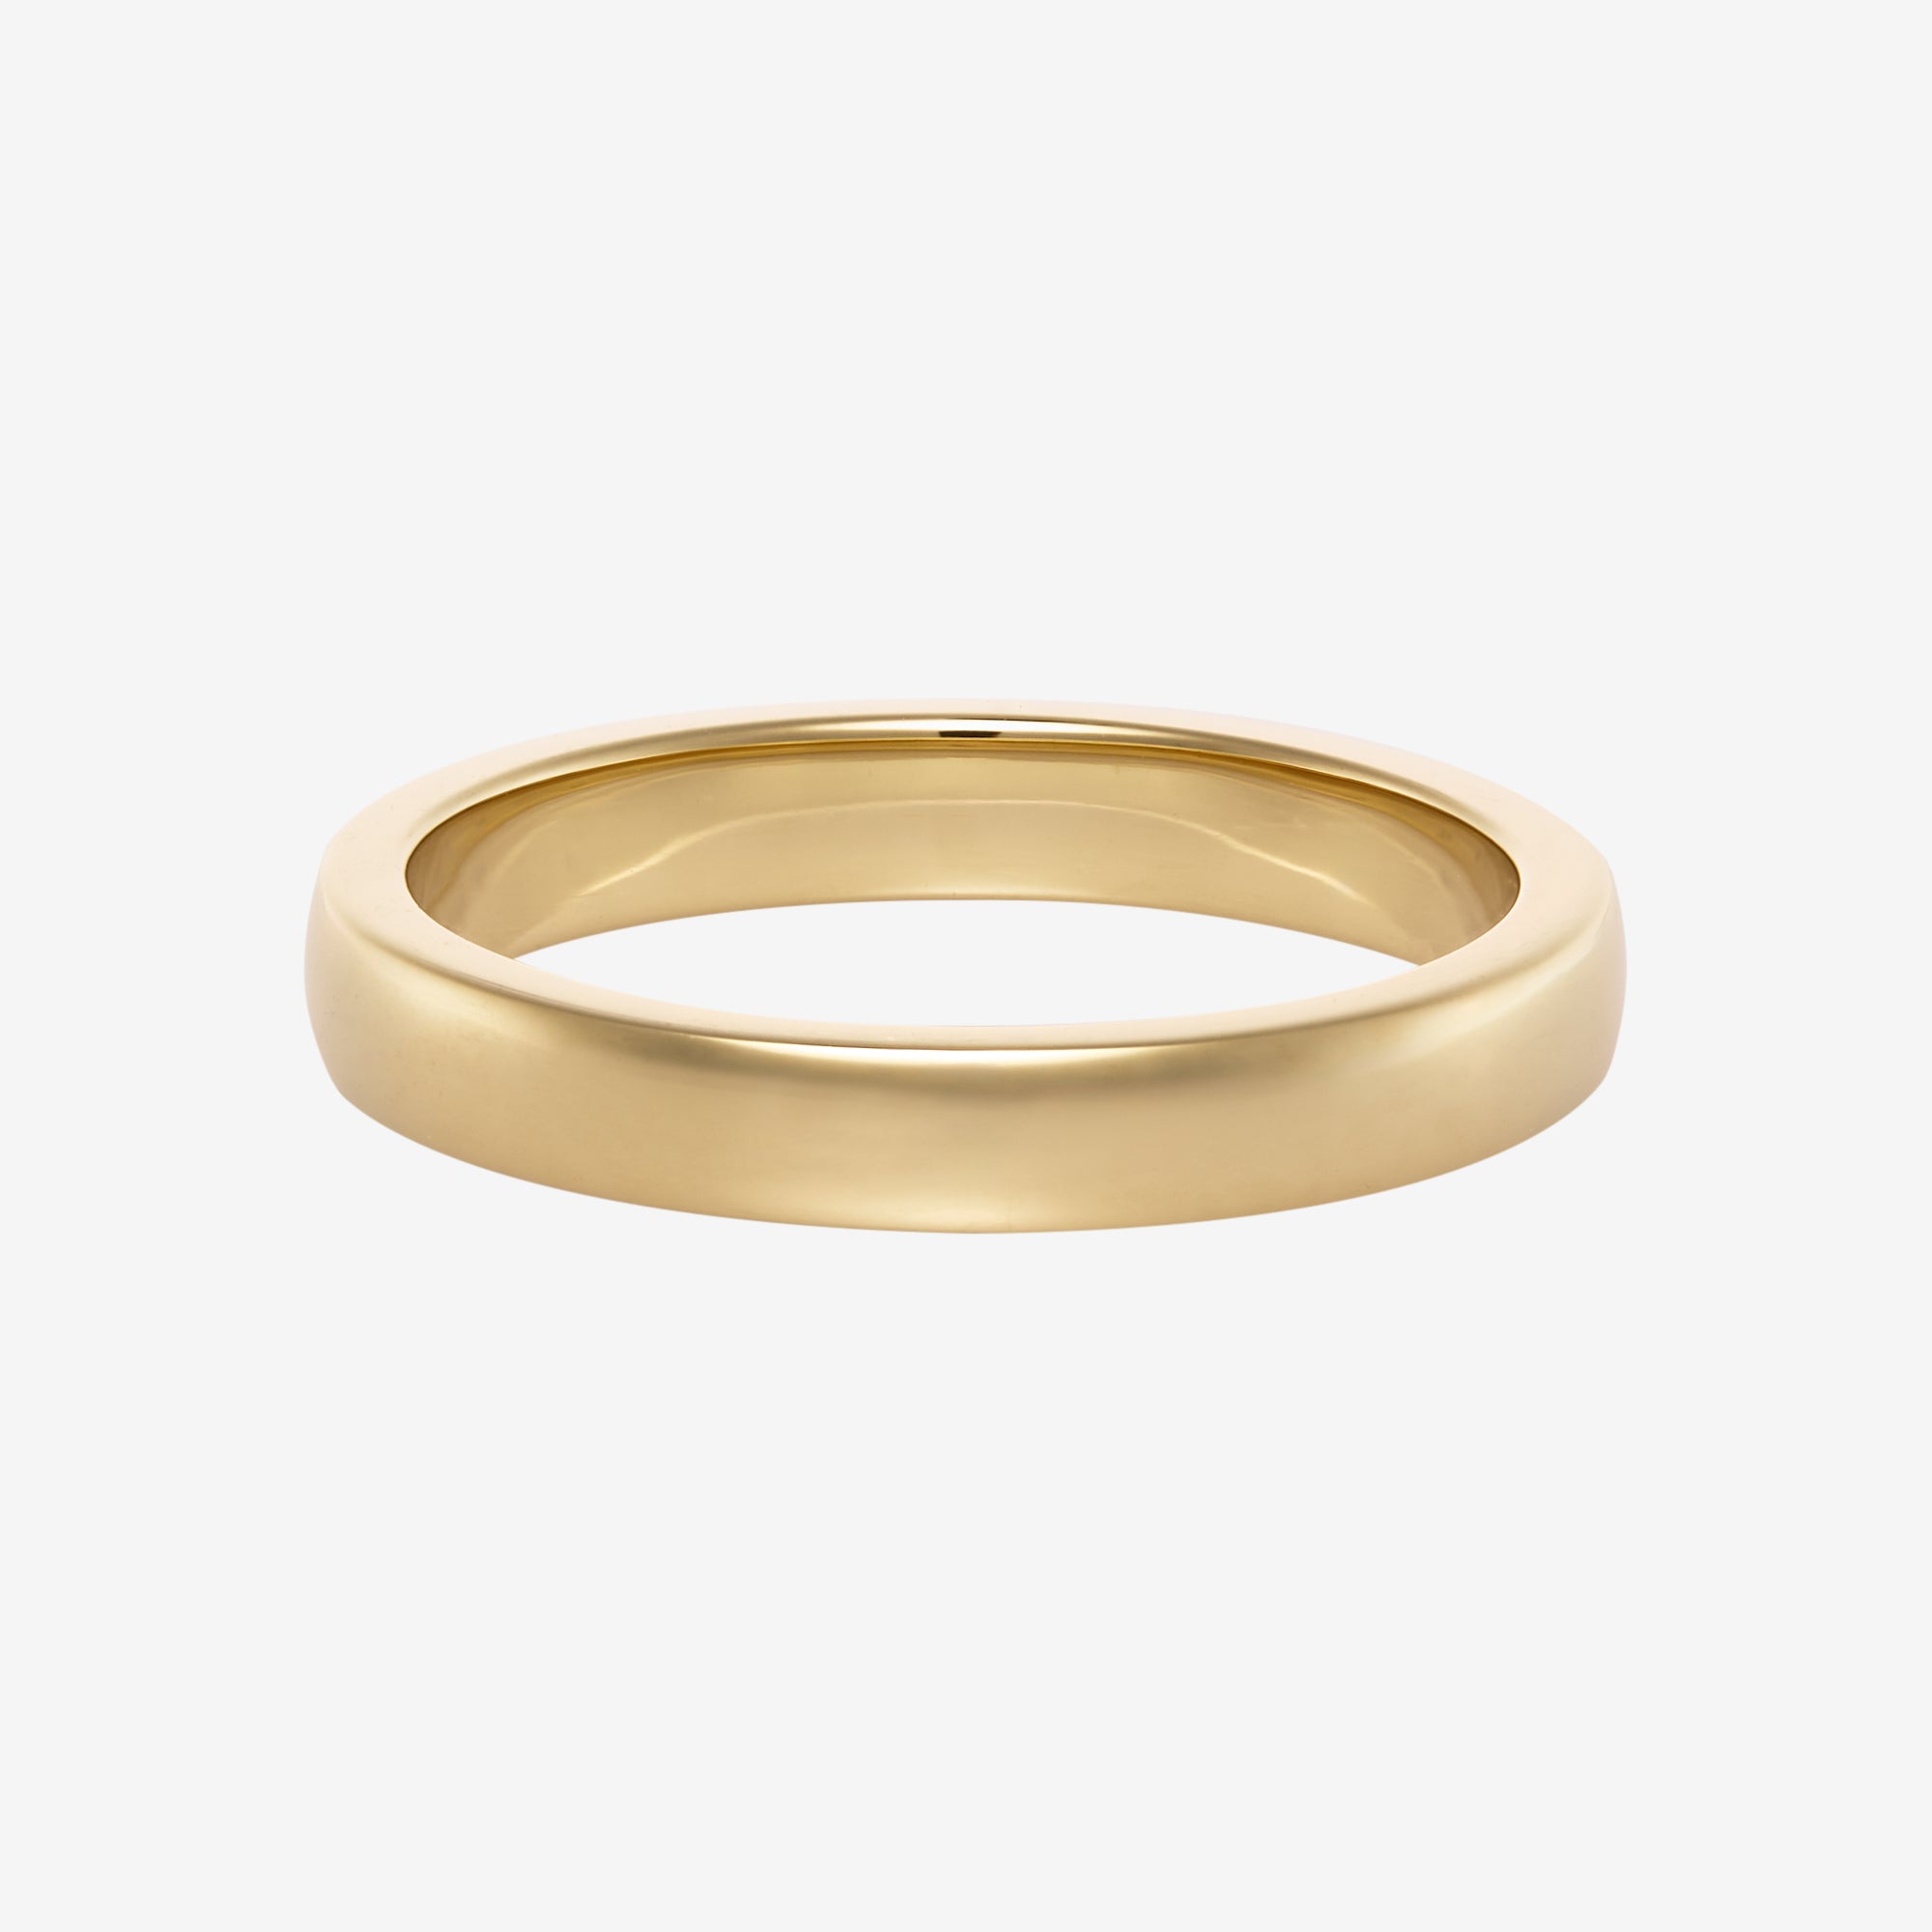 The One Bold Ring